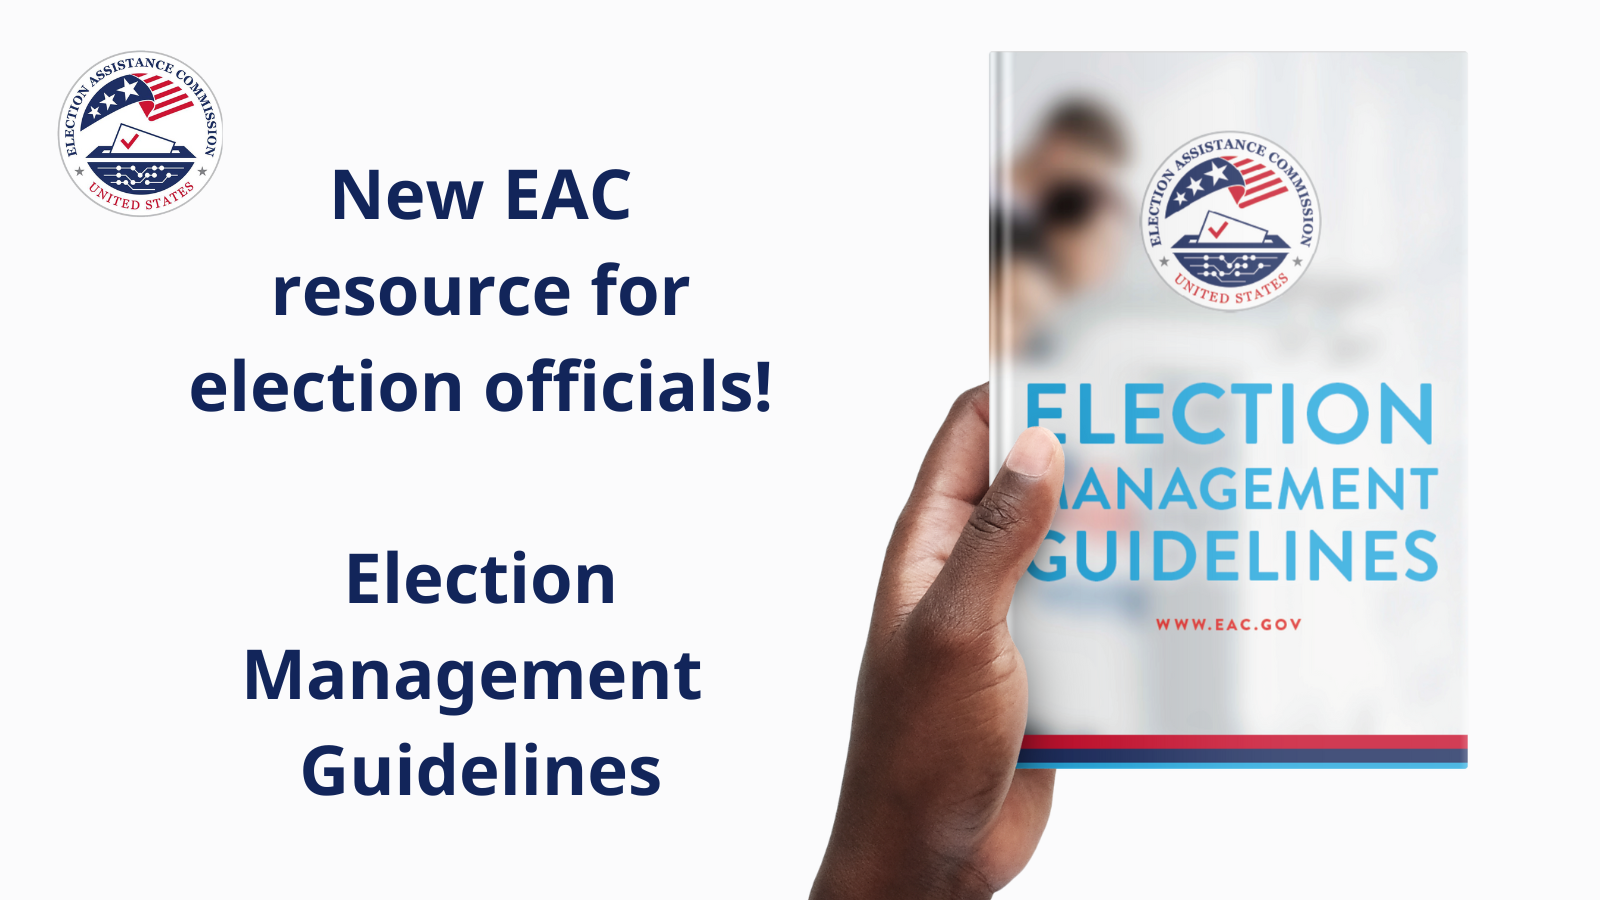 Image shows a hand holding the Election Management Guidelines. Text on the graphic reads: "New EAC resource for Election Officials. Election Management Guidelines."